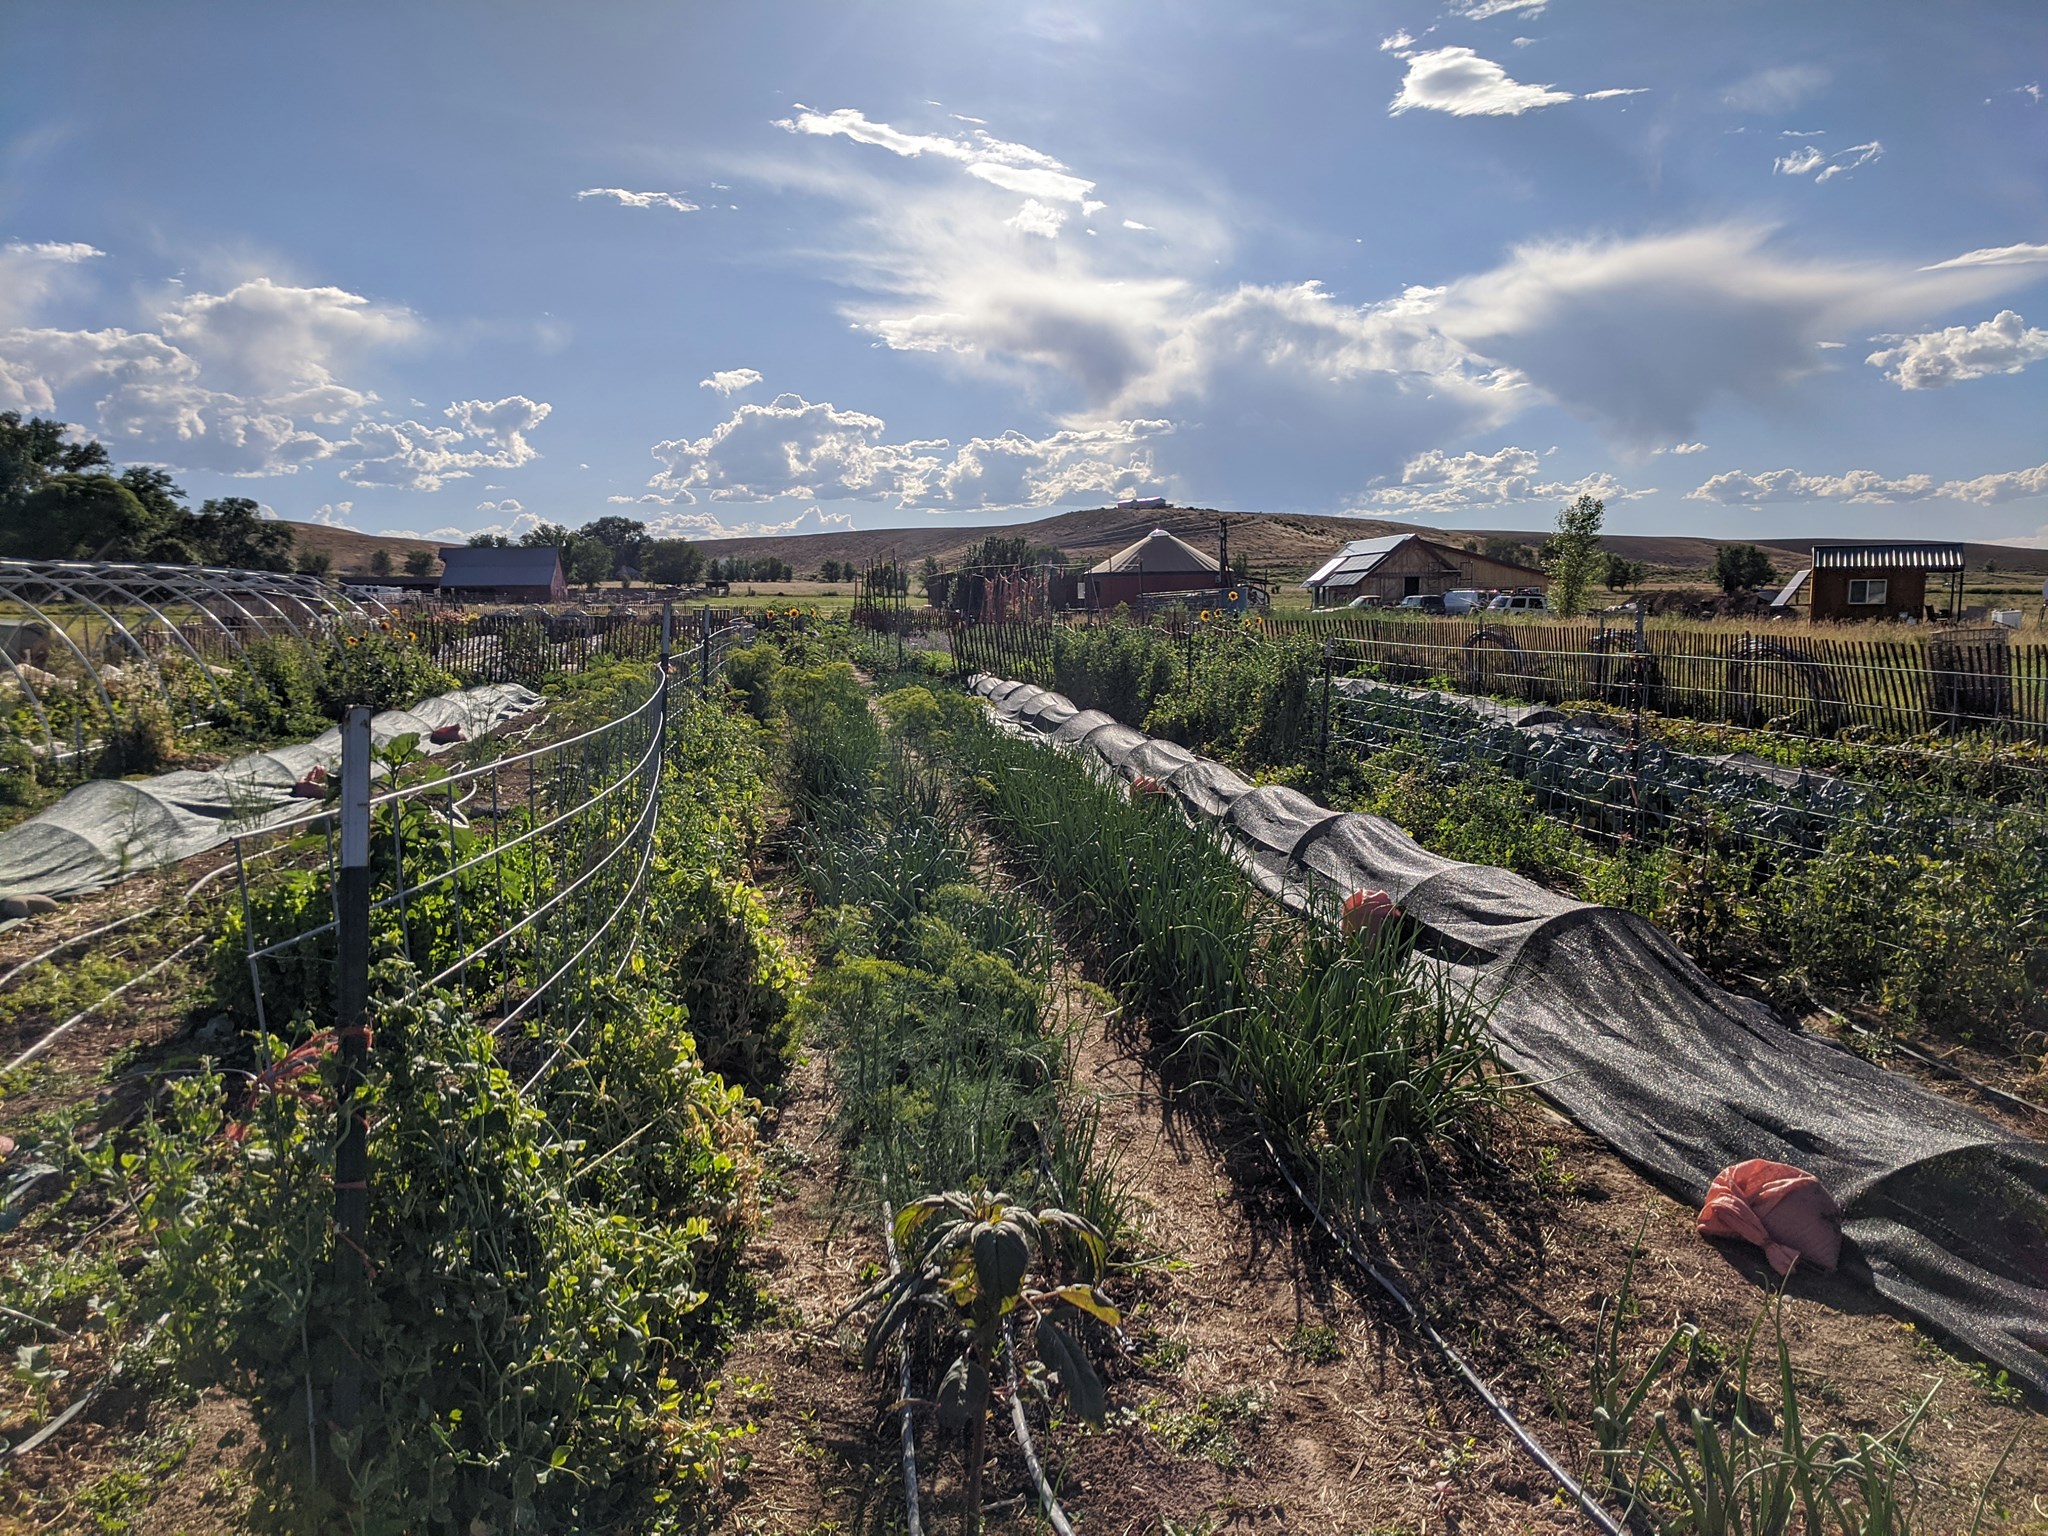 Picture of Yurtstead Farm in July 2020